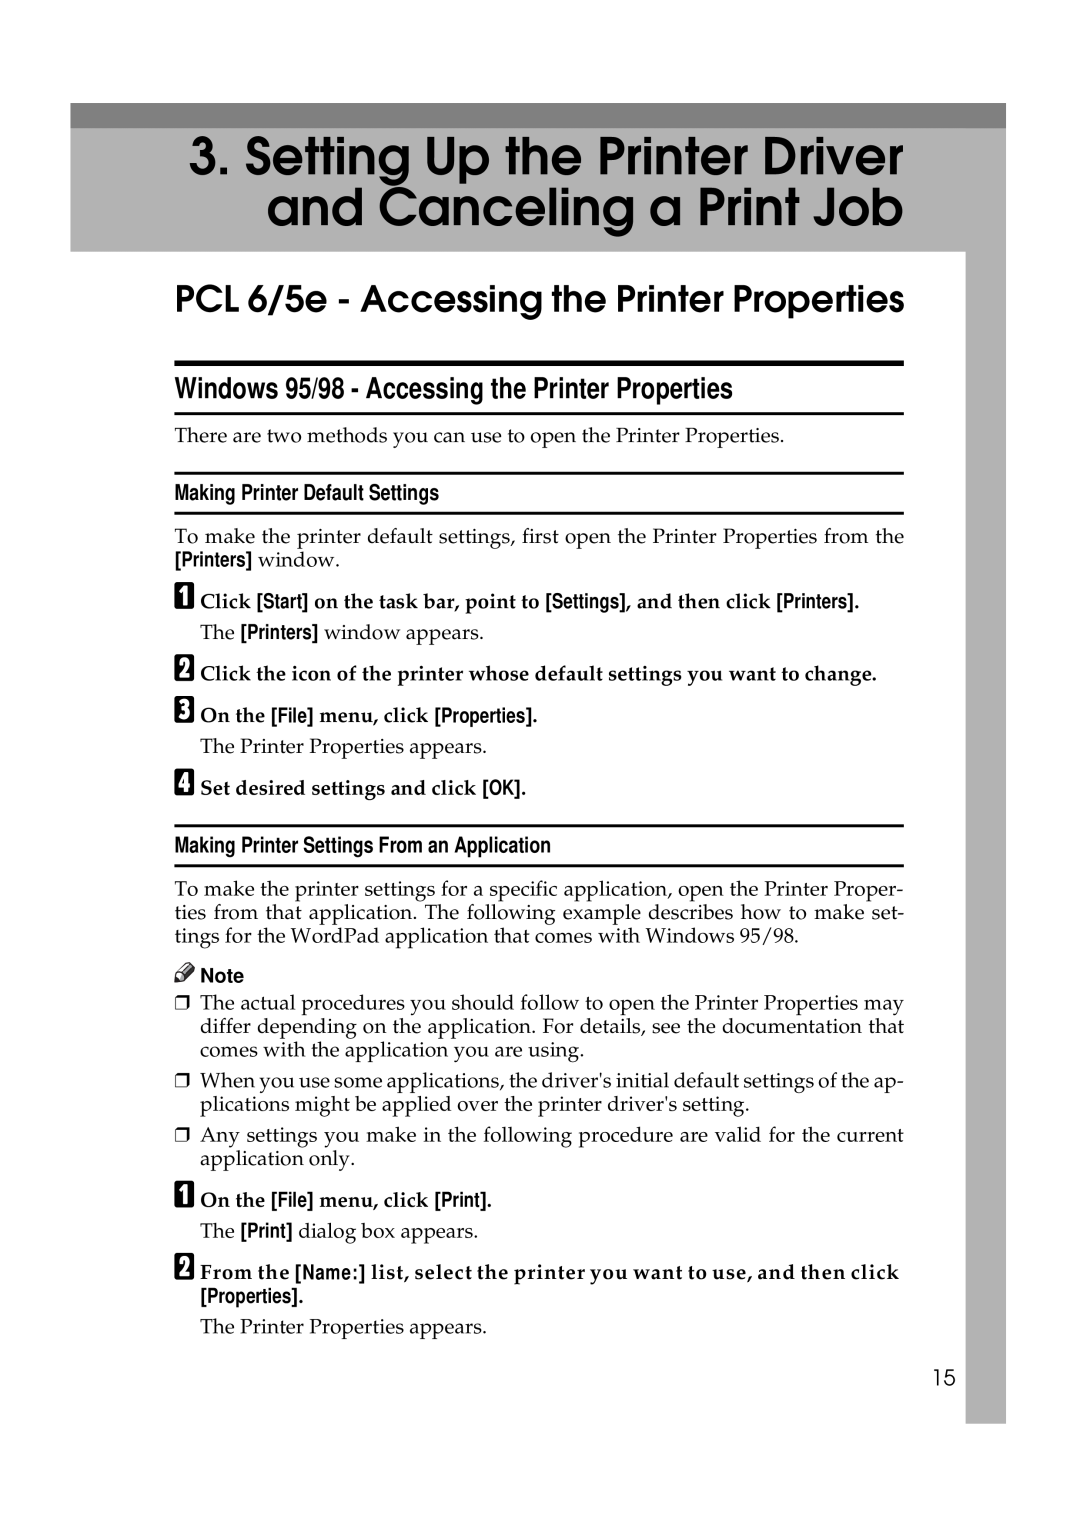 Ricoh Aficio AP2700 Setting Up the Printer Driver and Canceling a Print Job, PCL 6/5e - Accessing the Printer Properties 